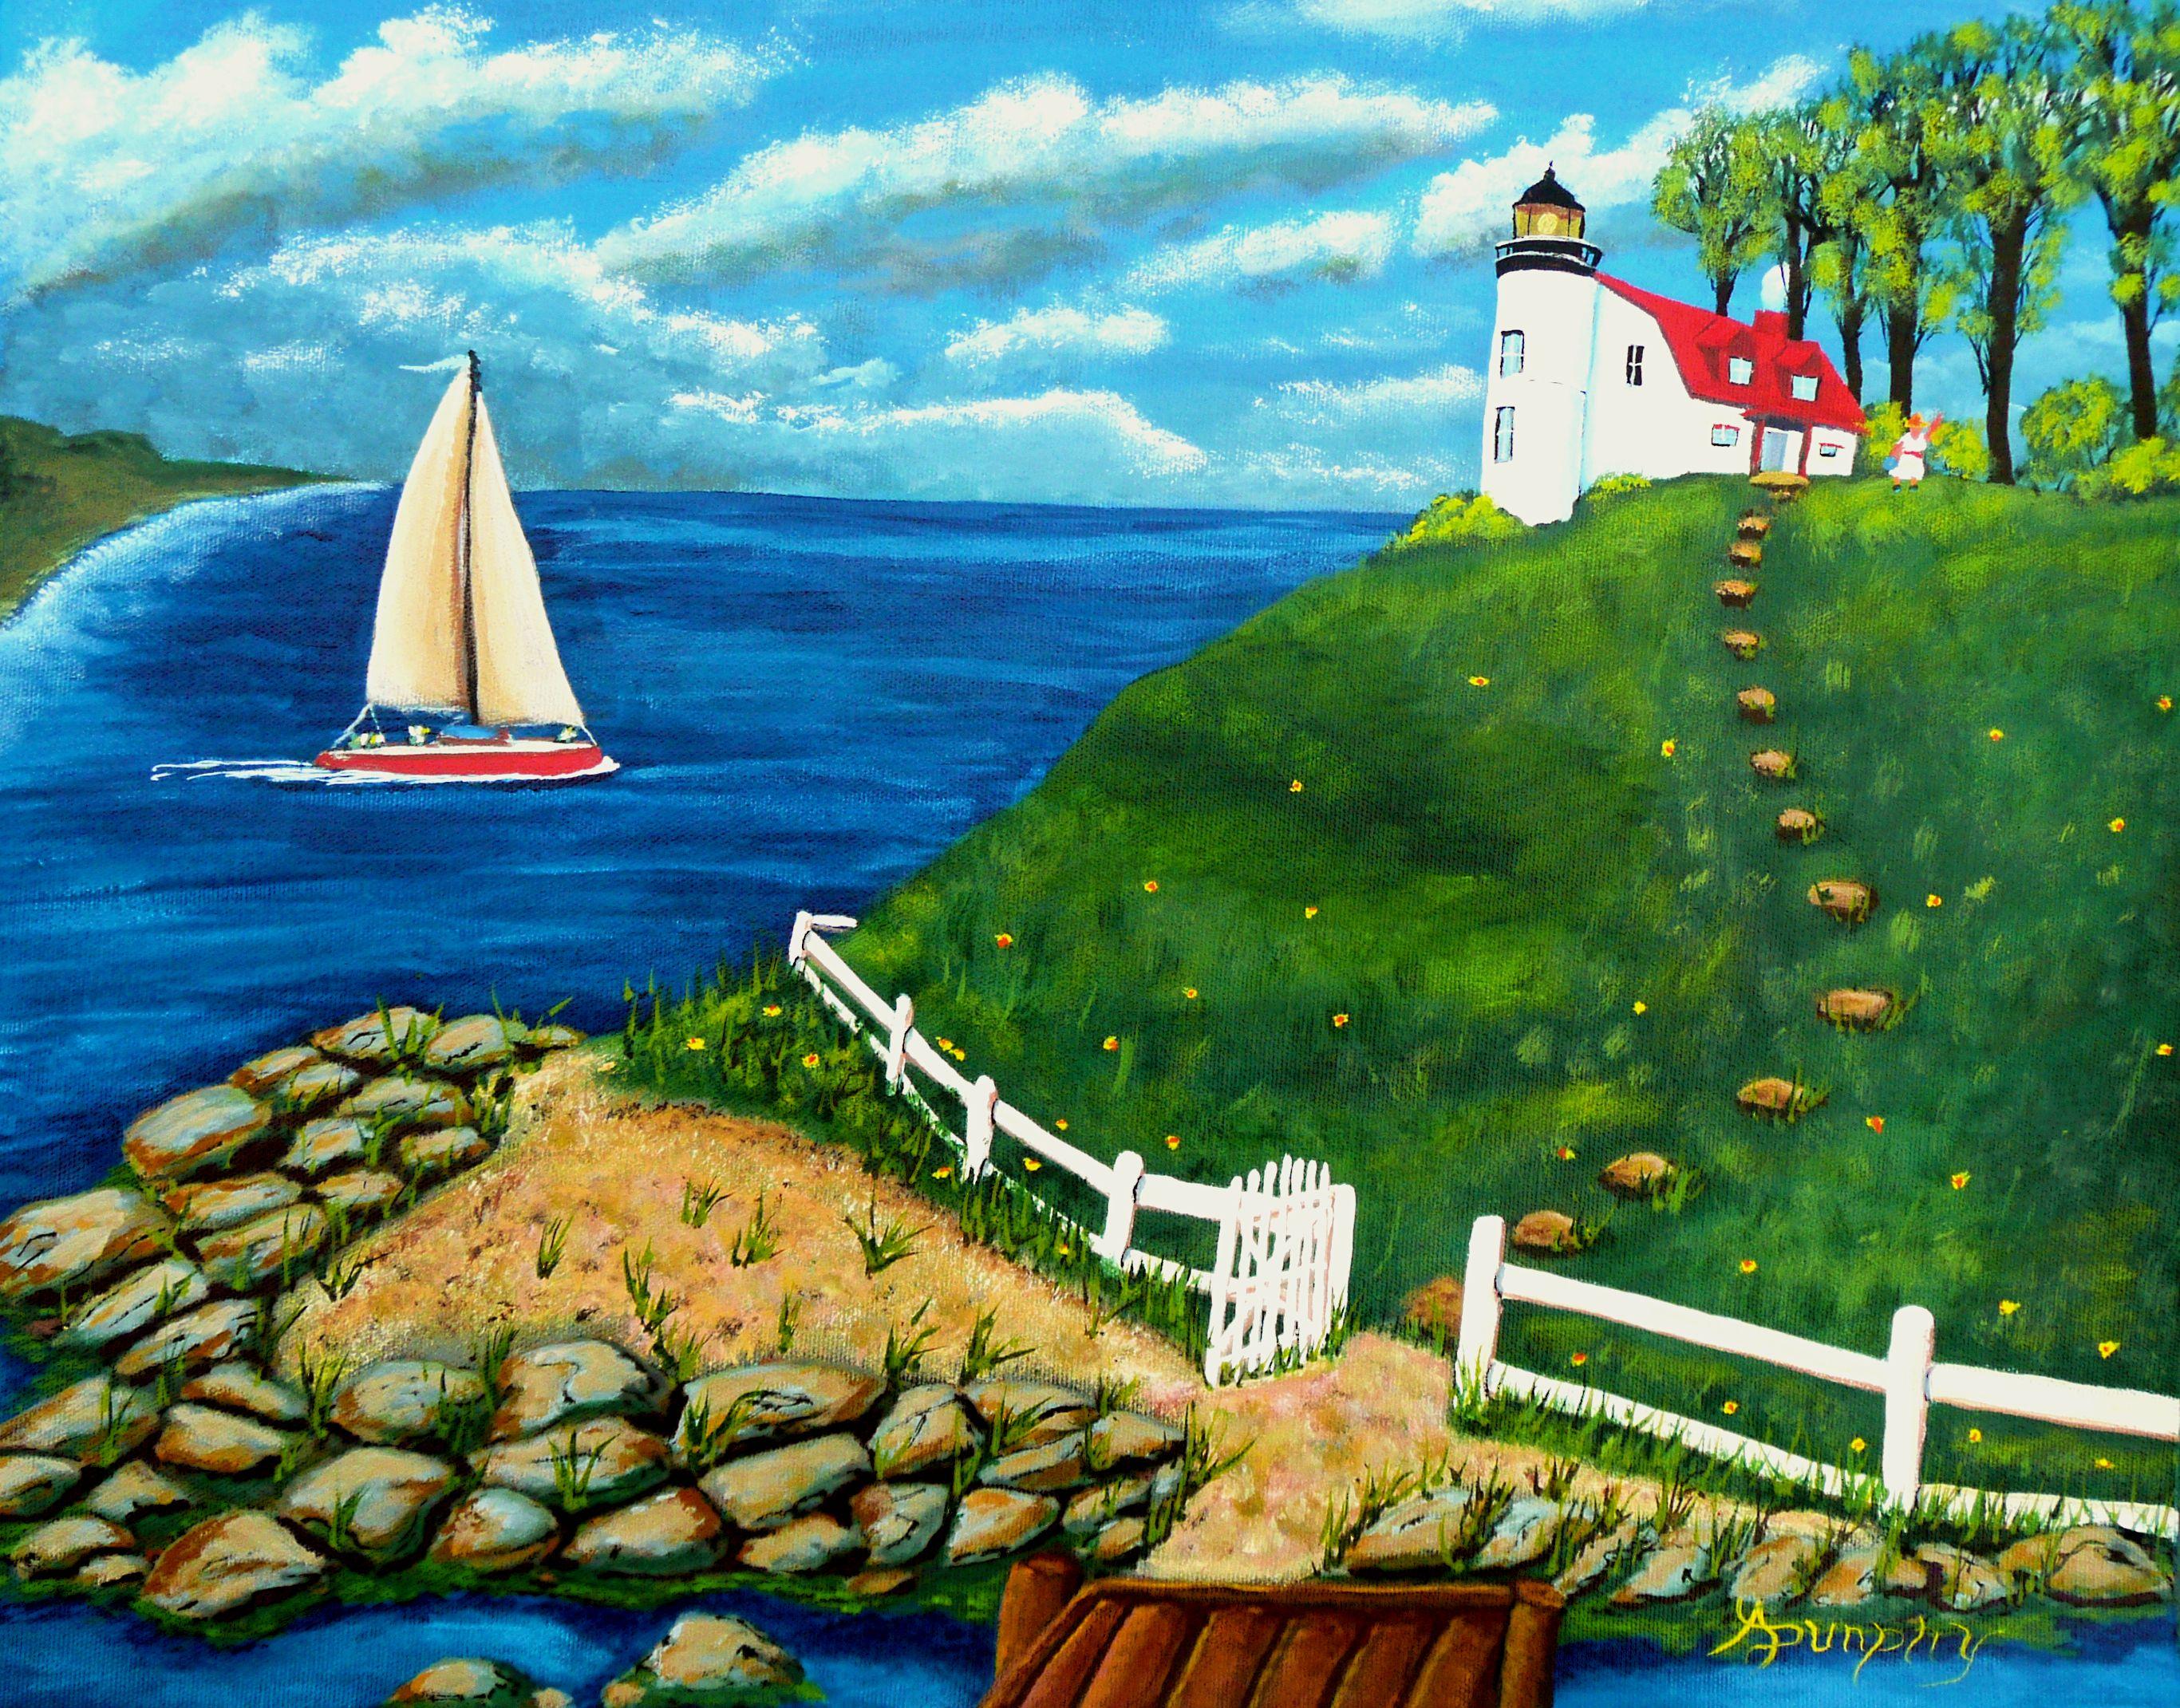 A calm summer day at the lighthouse. The sailboats are on the water. The gate is open to welcome you. This nautical scene has been created using only professional grade acrylics on a sheet of un-stretched canvas with an overall size of 16x20 inches.